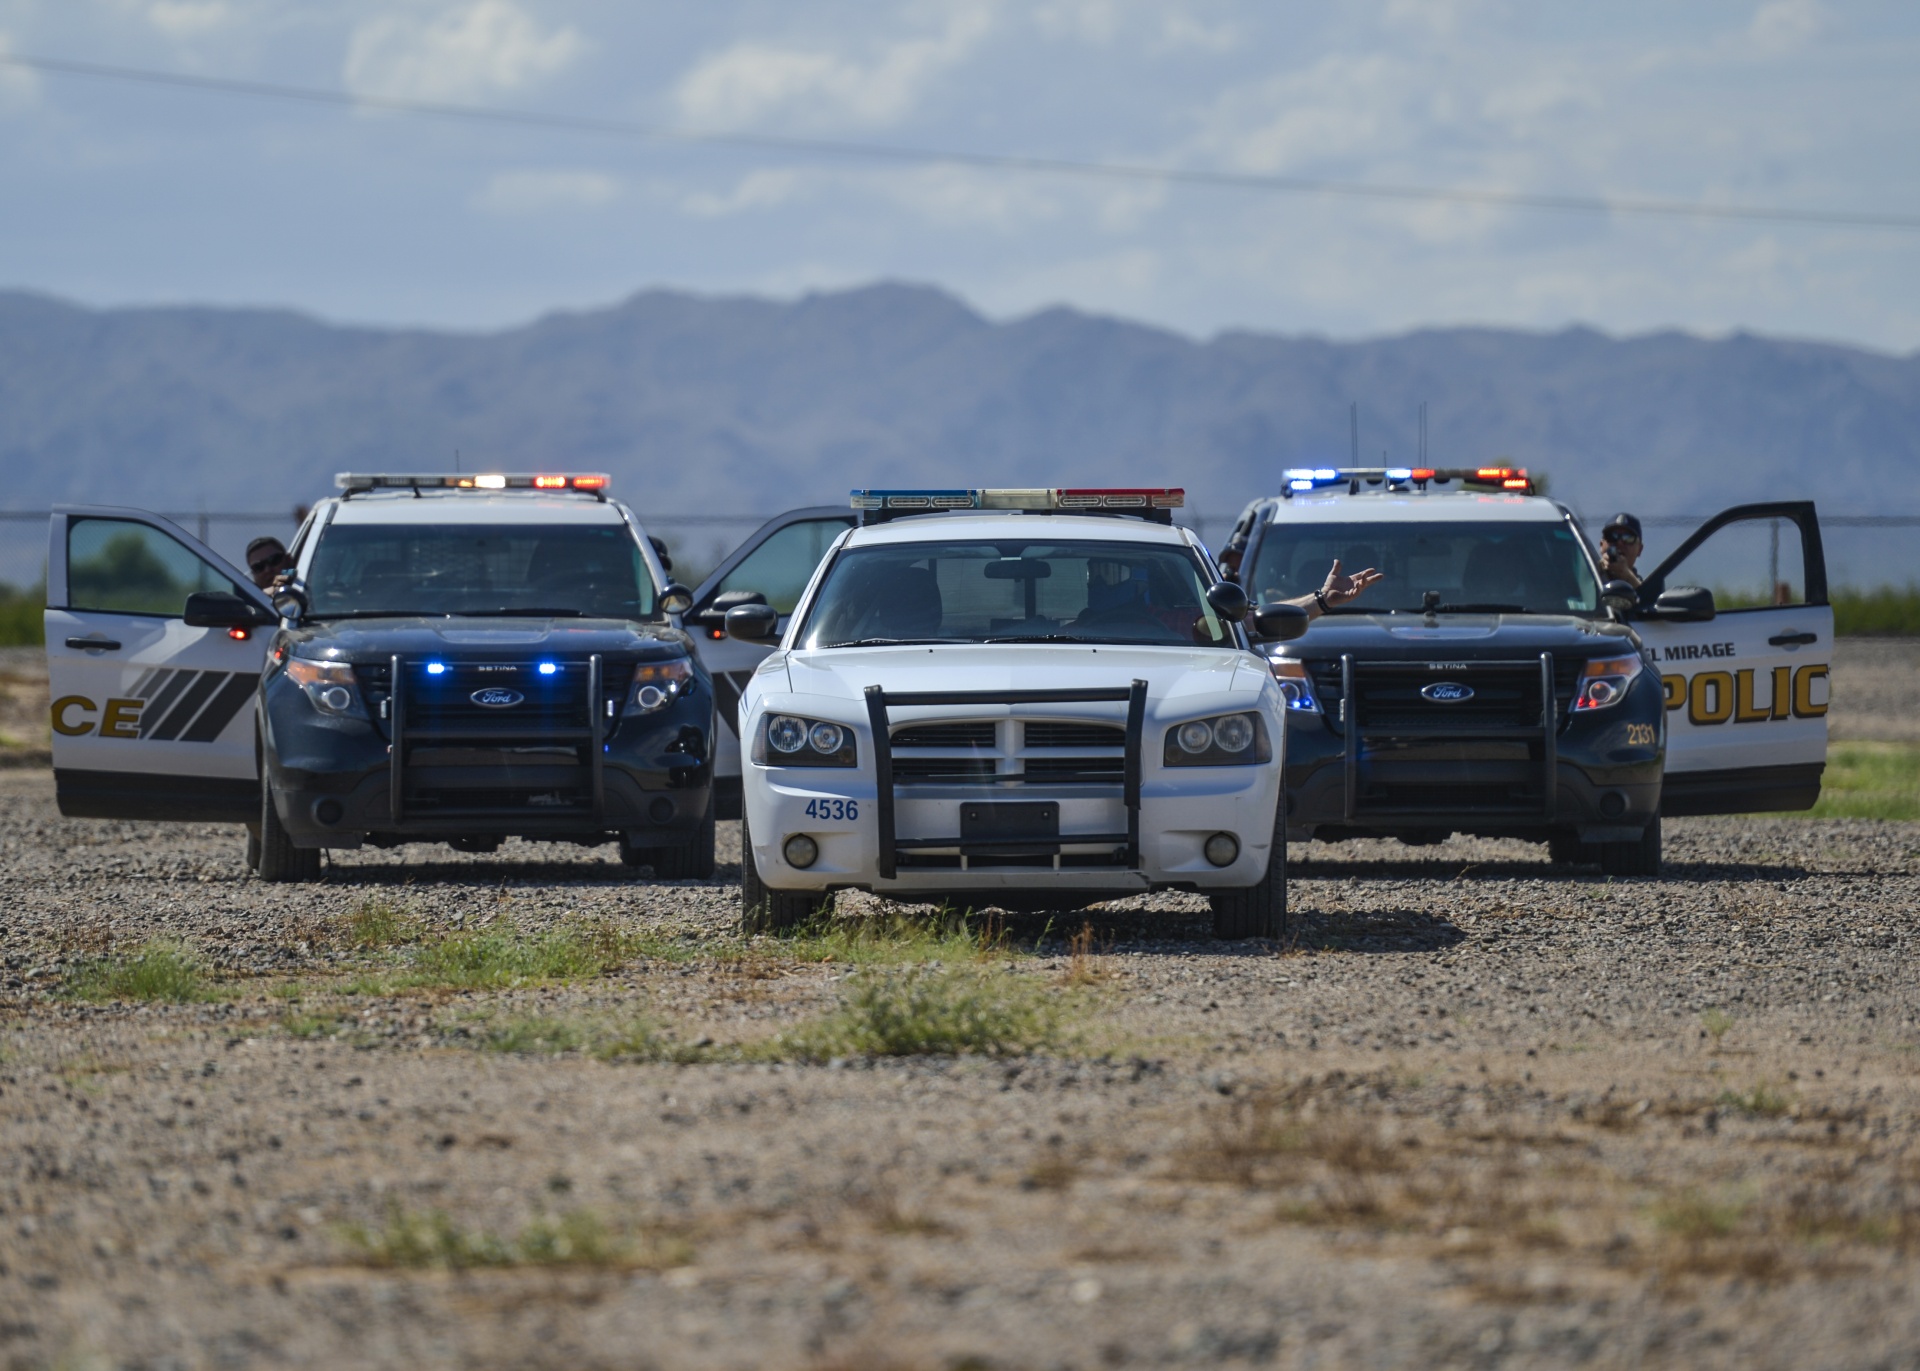 Police officers from around Maricopa County stage an arrest during an exercise as part of an Emergency Vehicle Operations Course held at Luke Air Force Base, Ariz., Aug. 21, 2017.